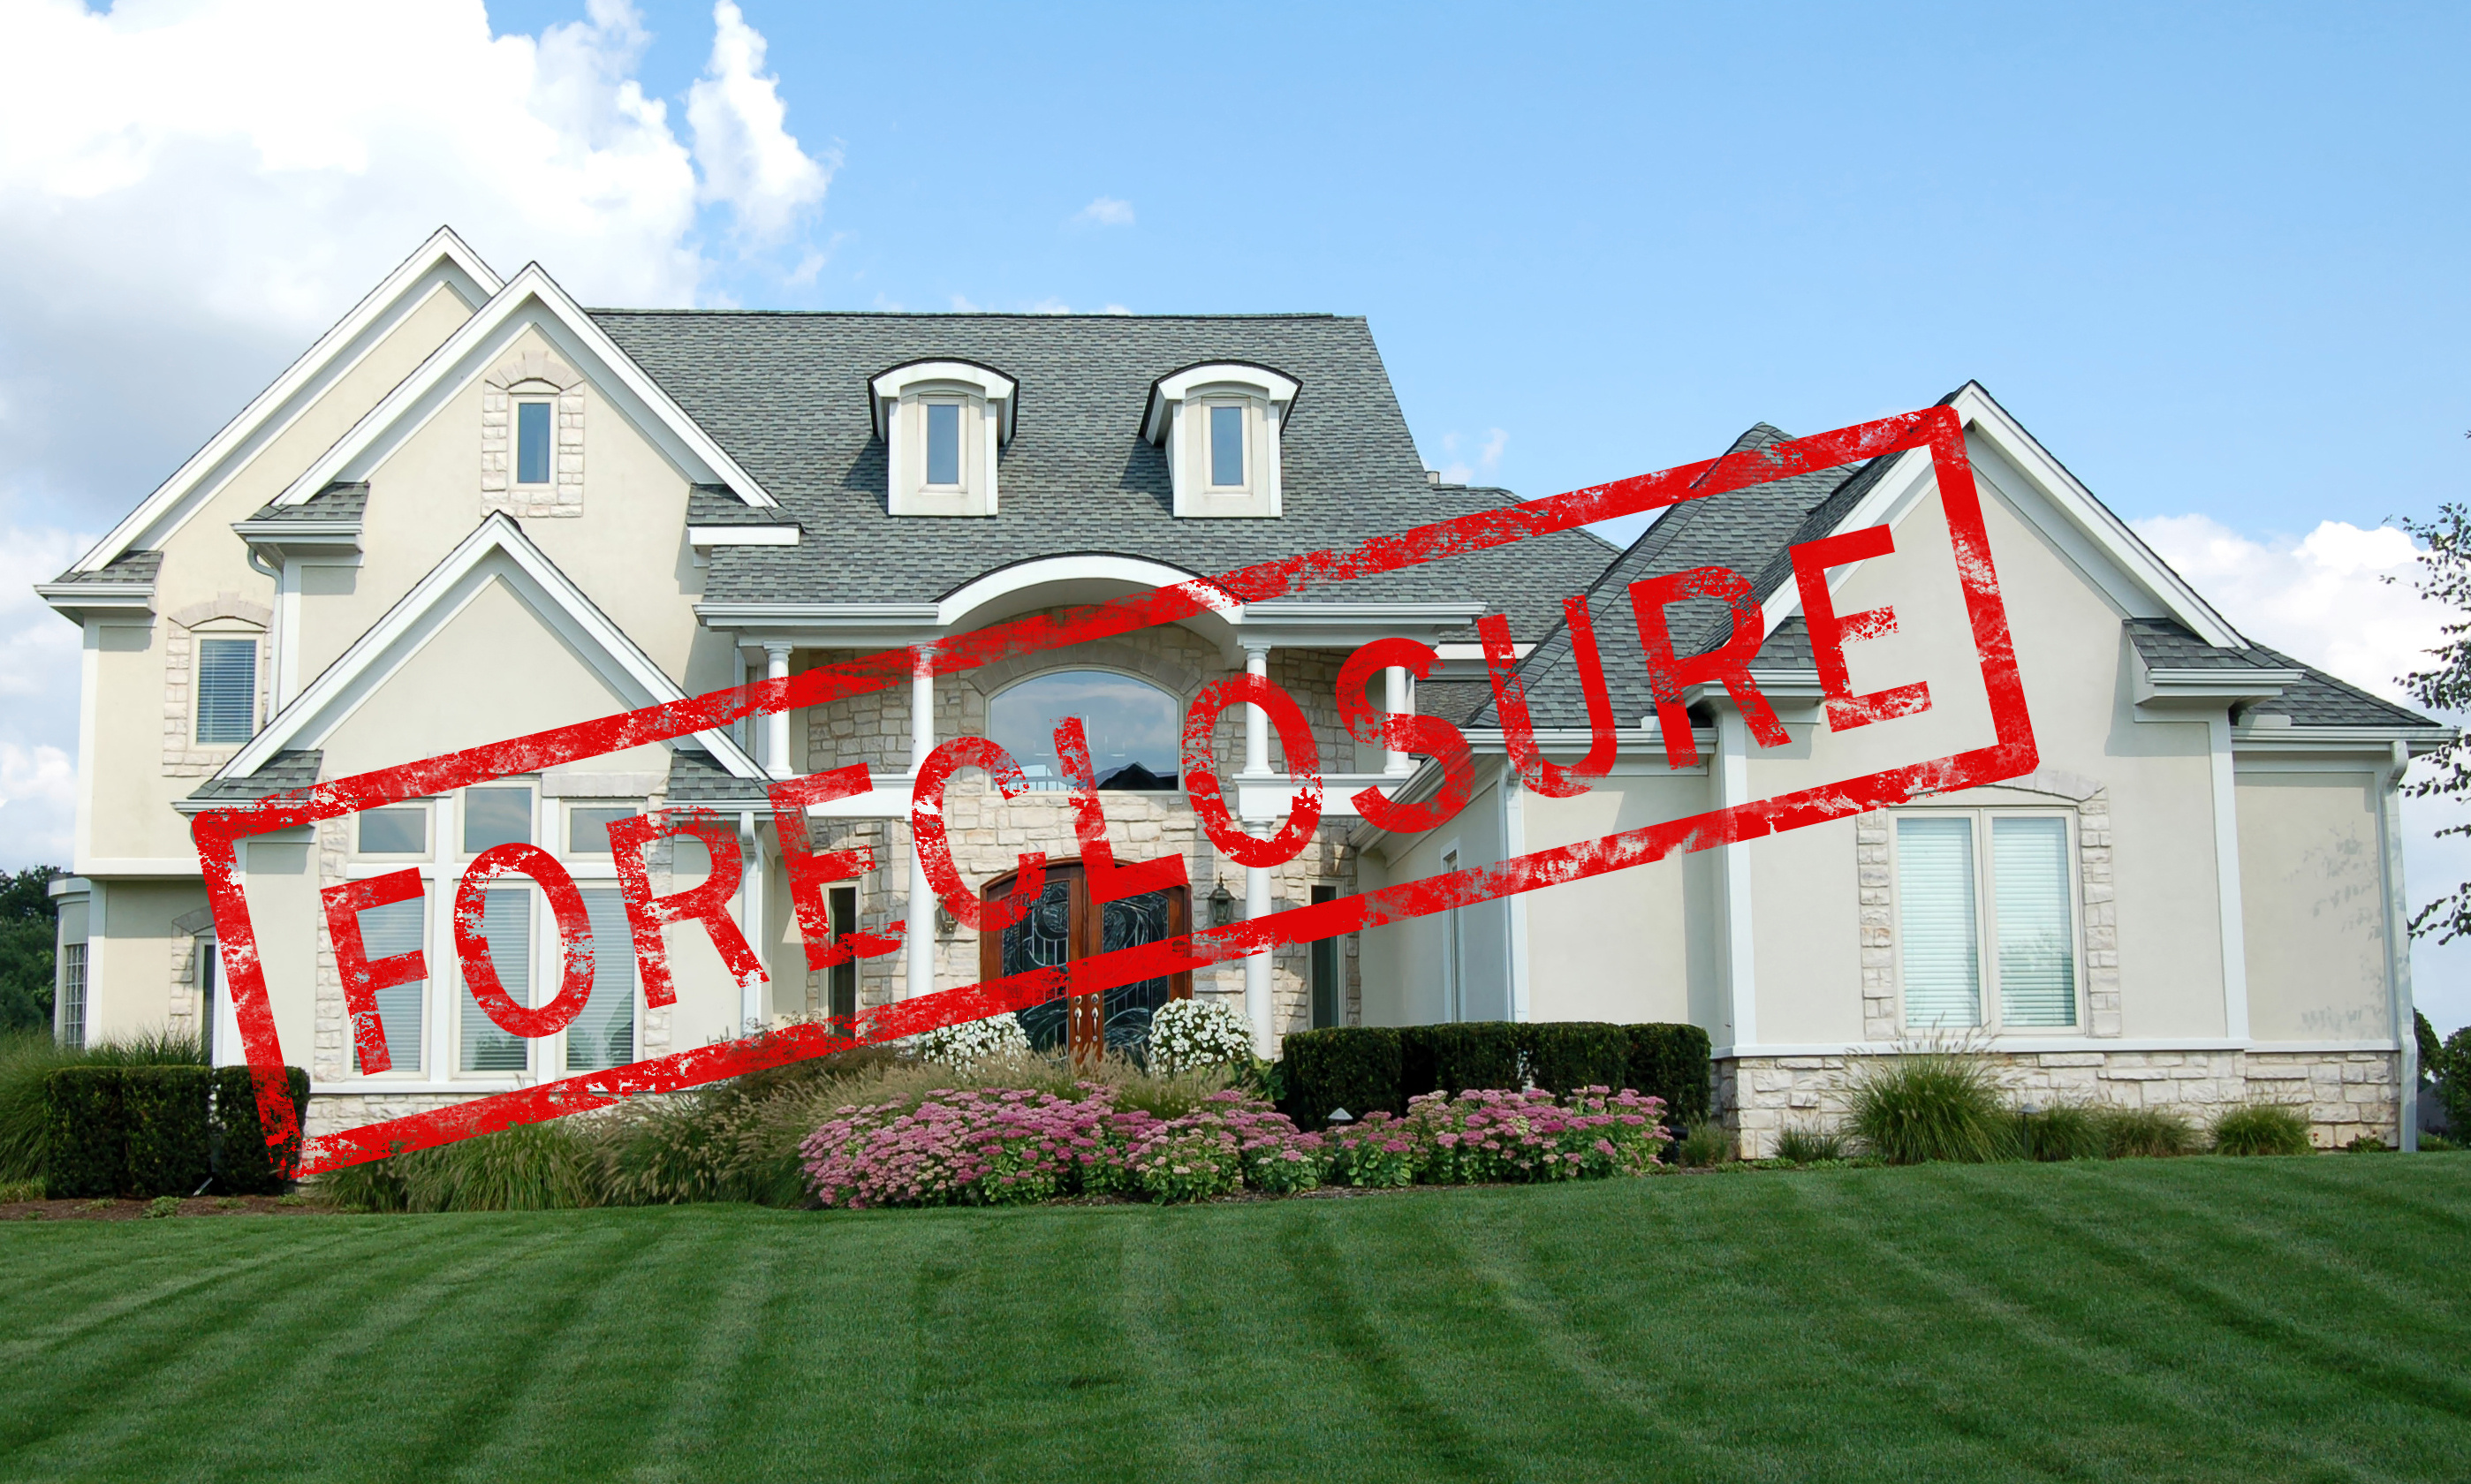 Call Stephanie L. Duffy Appraisal Services when you need valuations pertaining to Riverside foreclosures